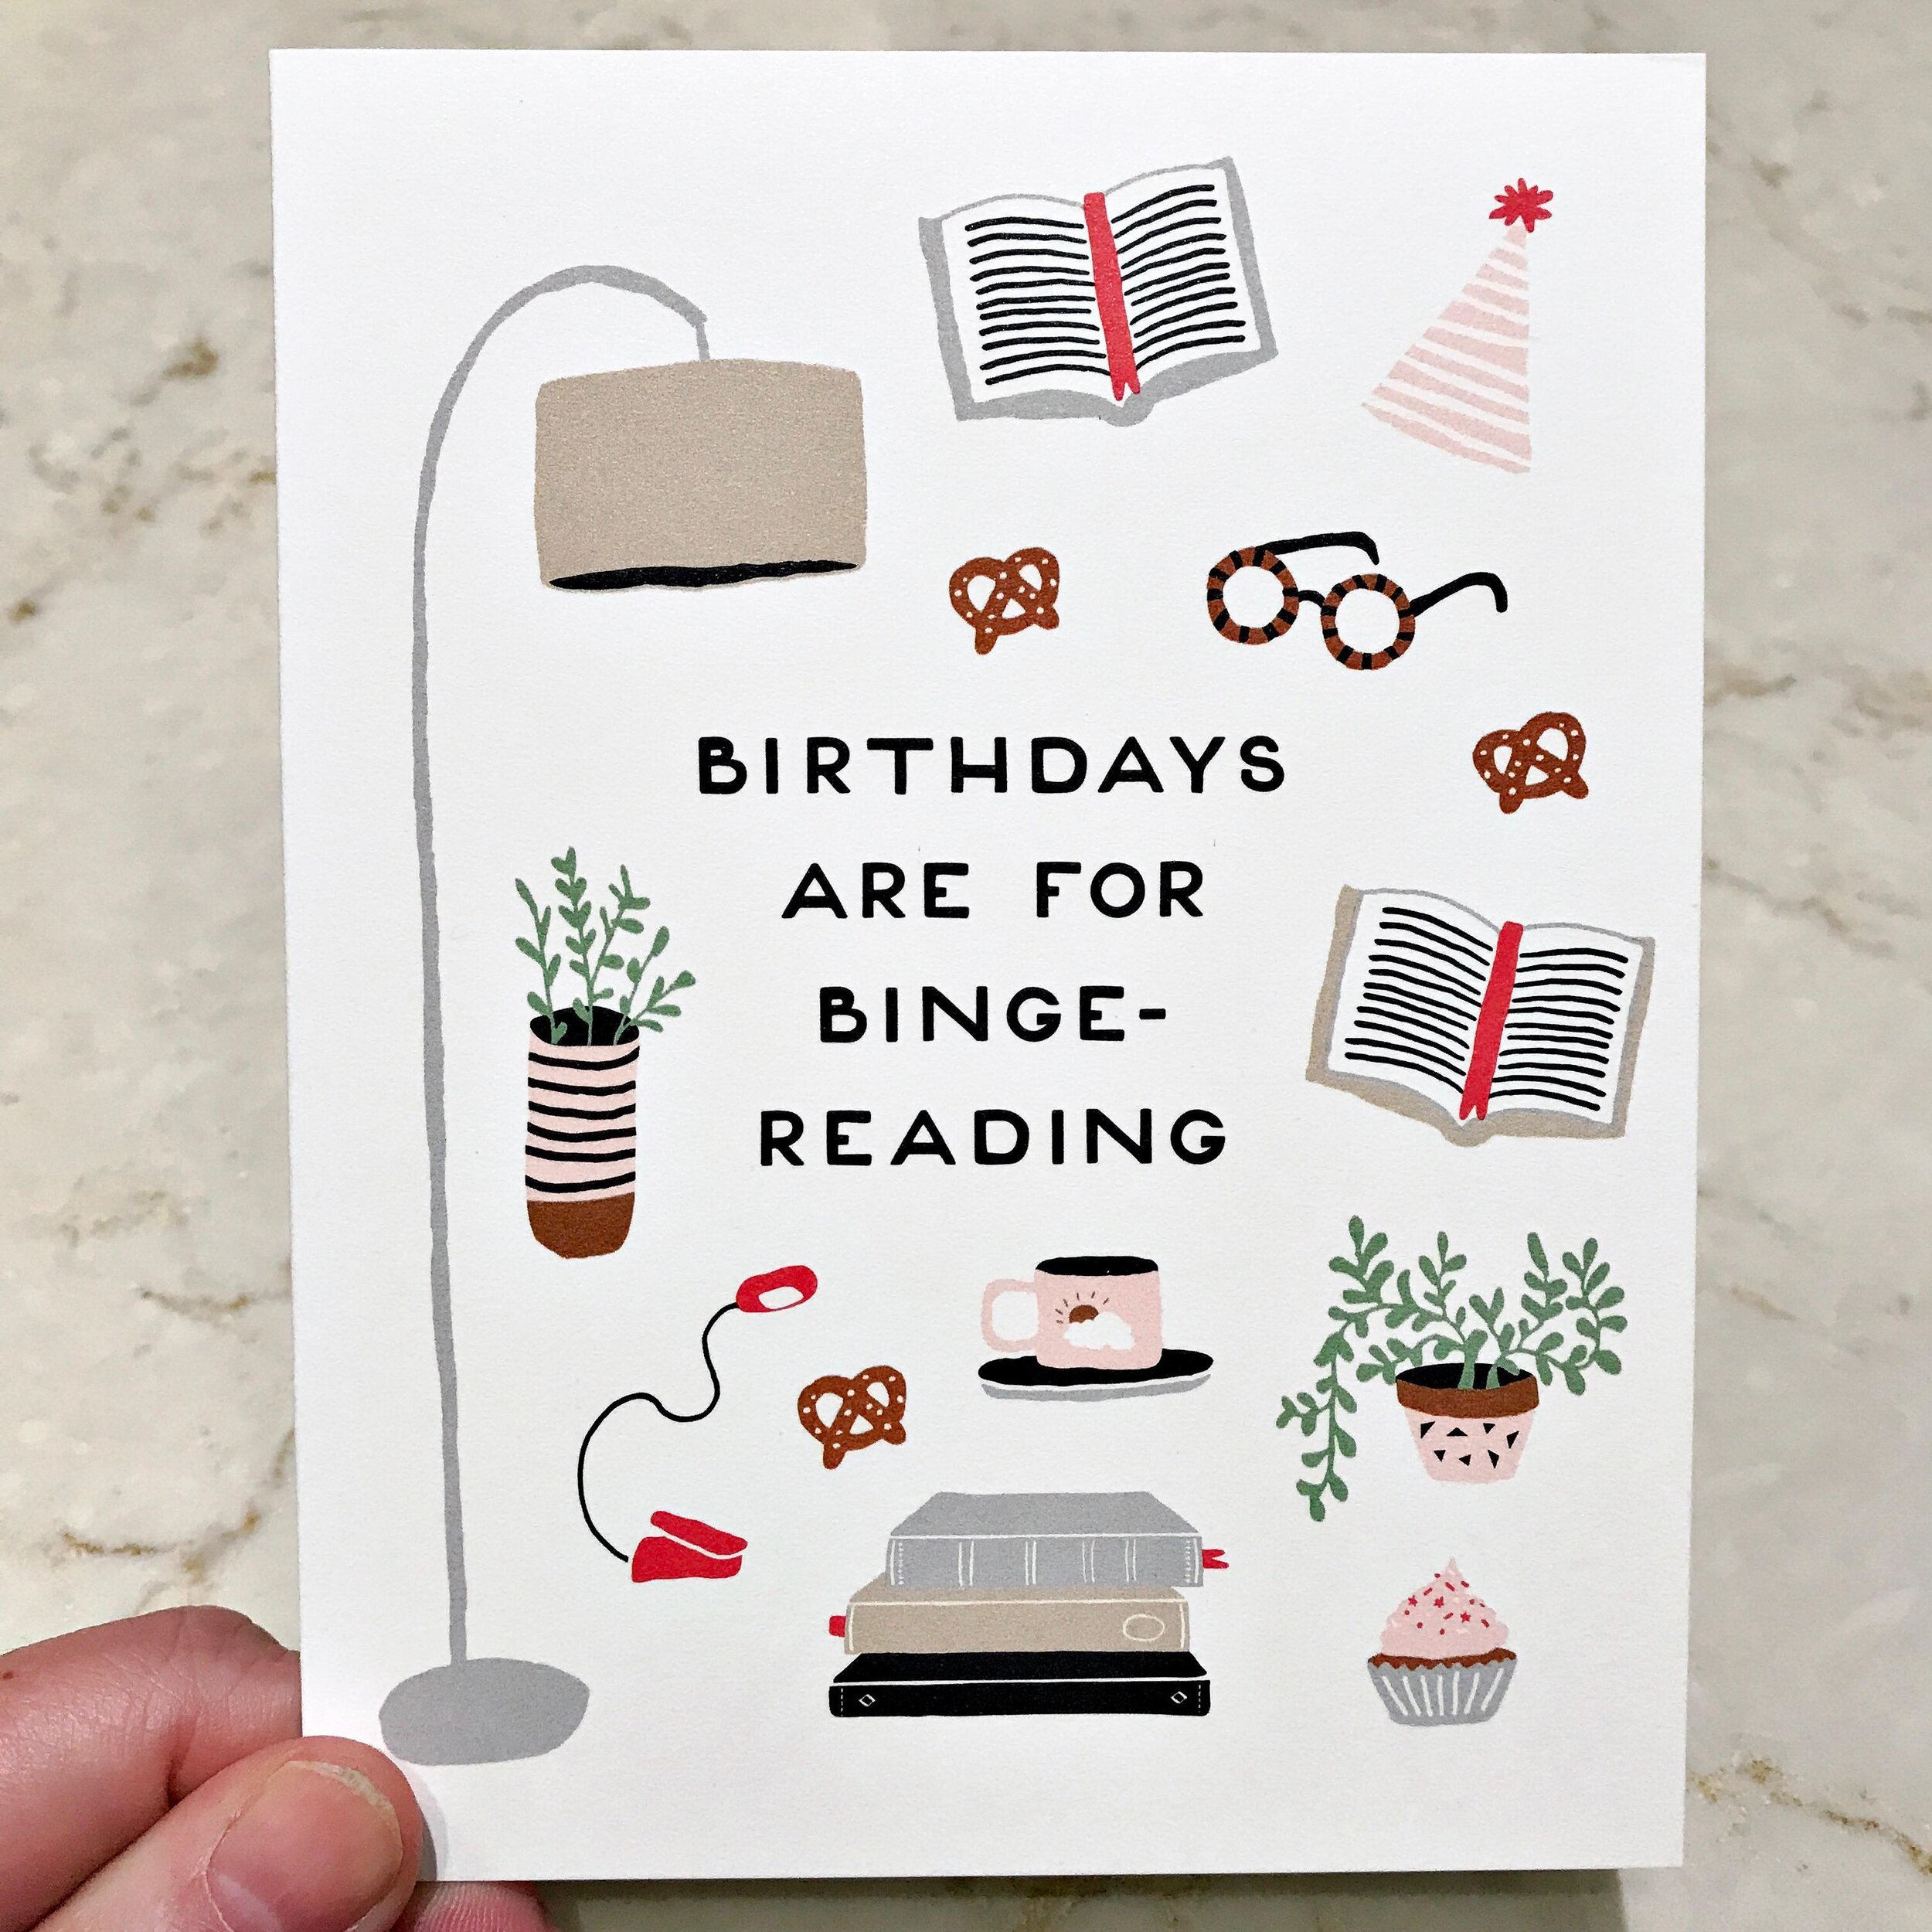 Don&rsquo;t forget to send a card! We have a great selection of cards for all occasions. Proceeds from the Friends Library Store benefit @multnomahcountylibrary